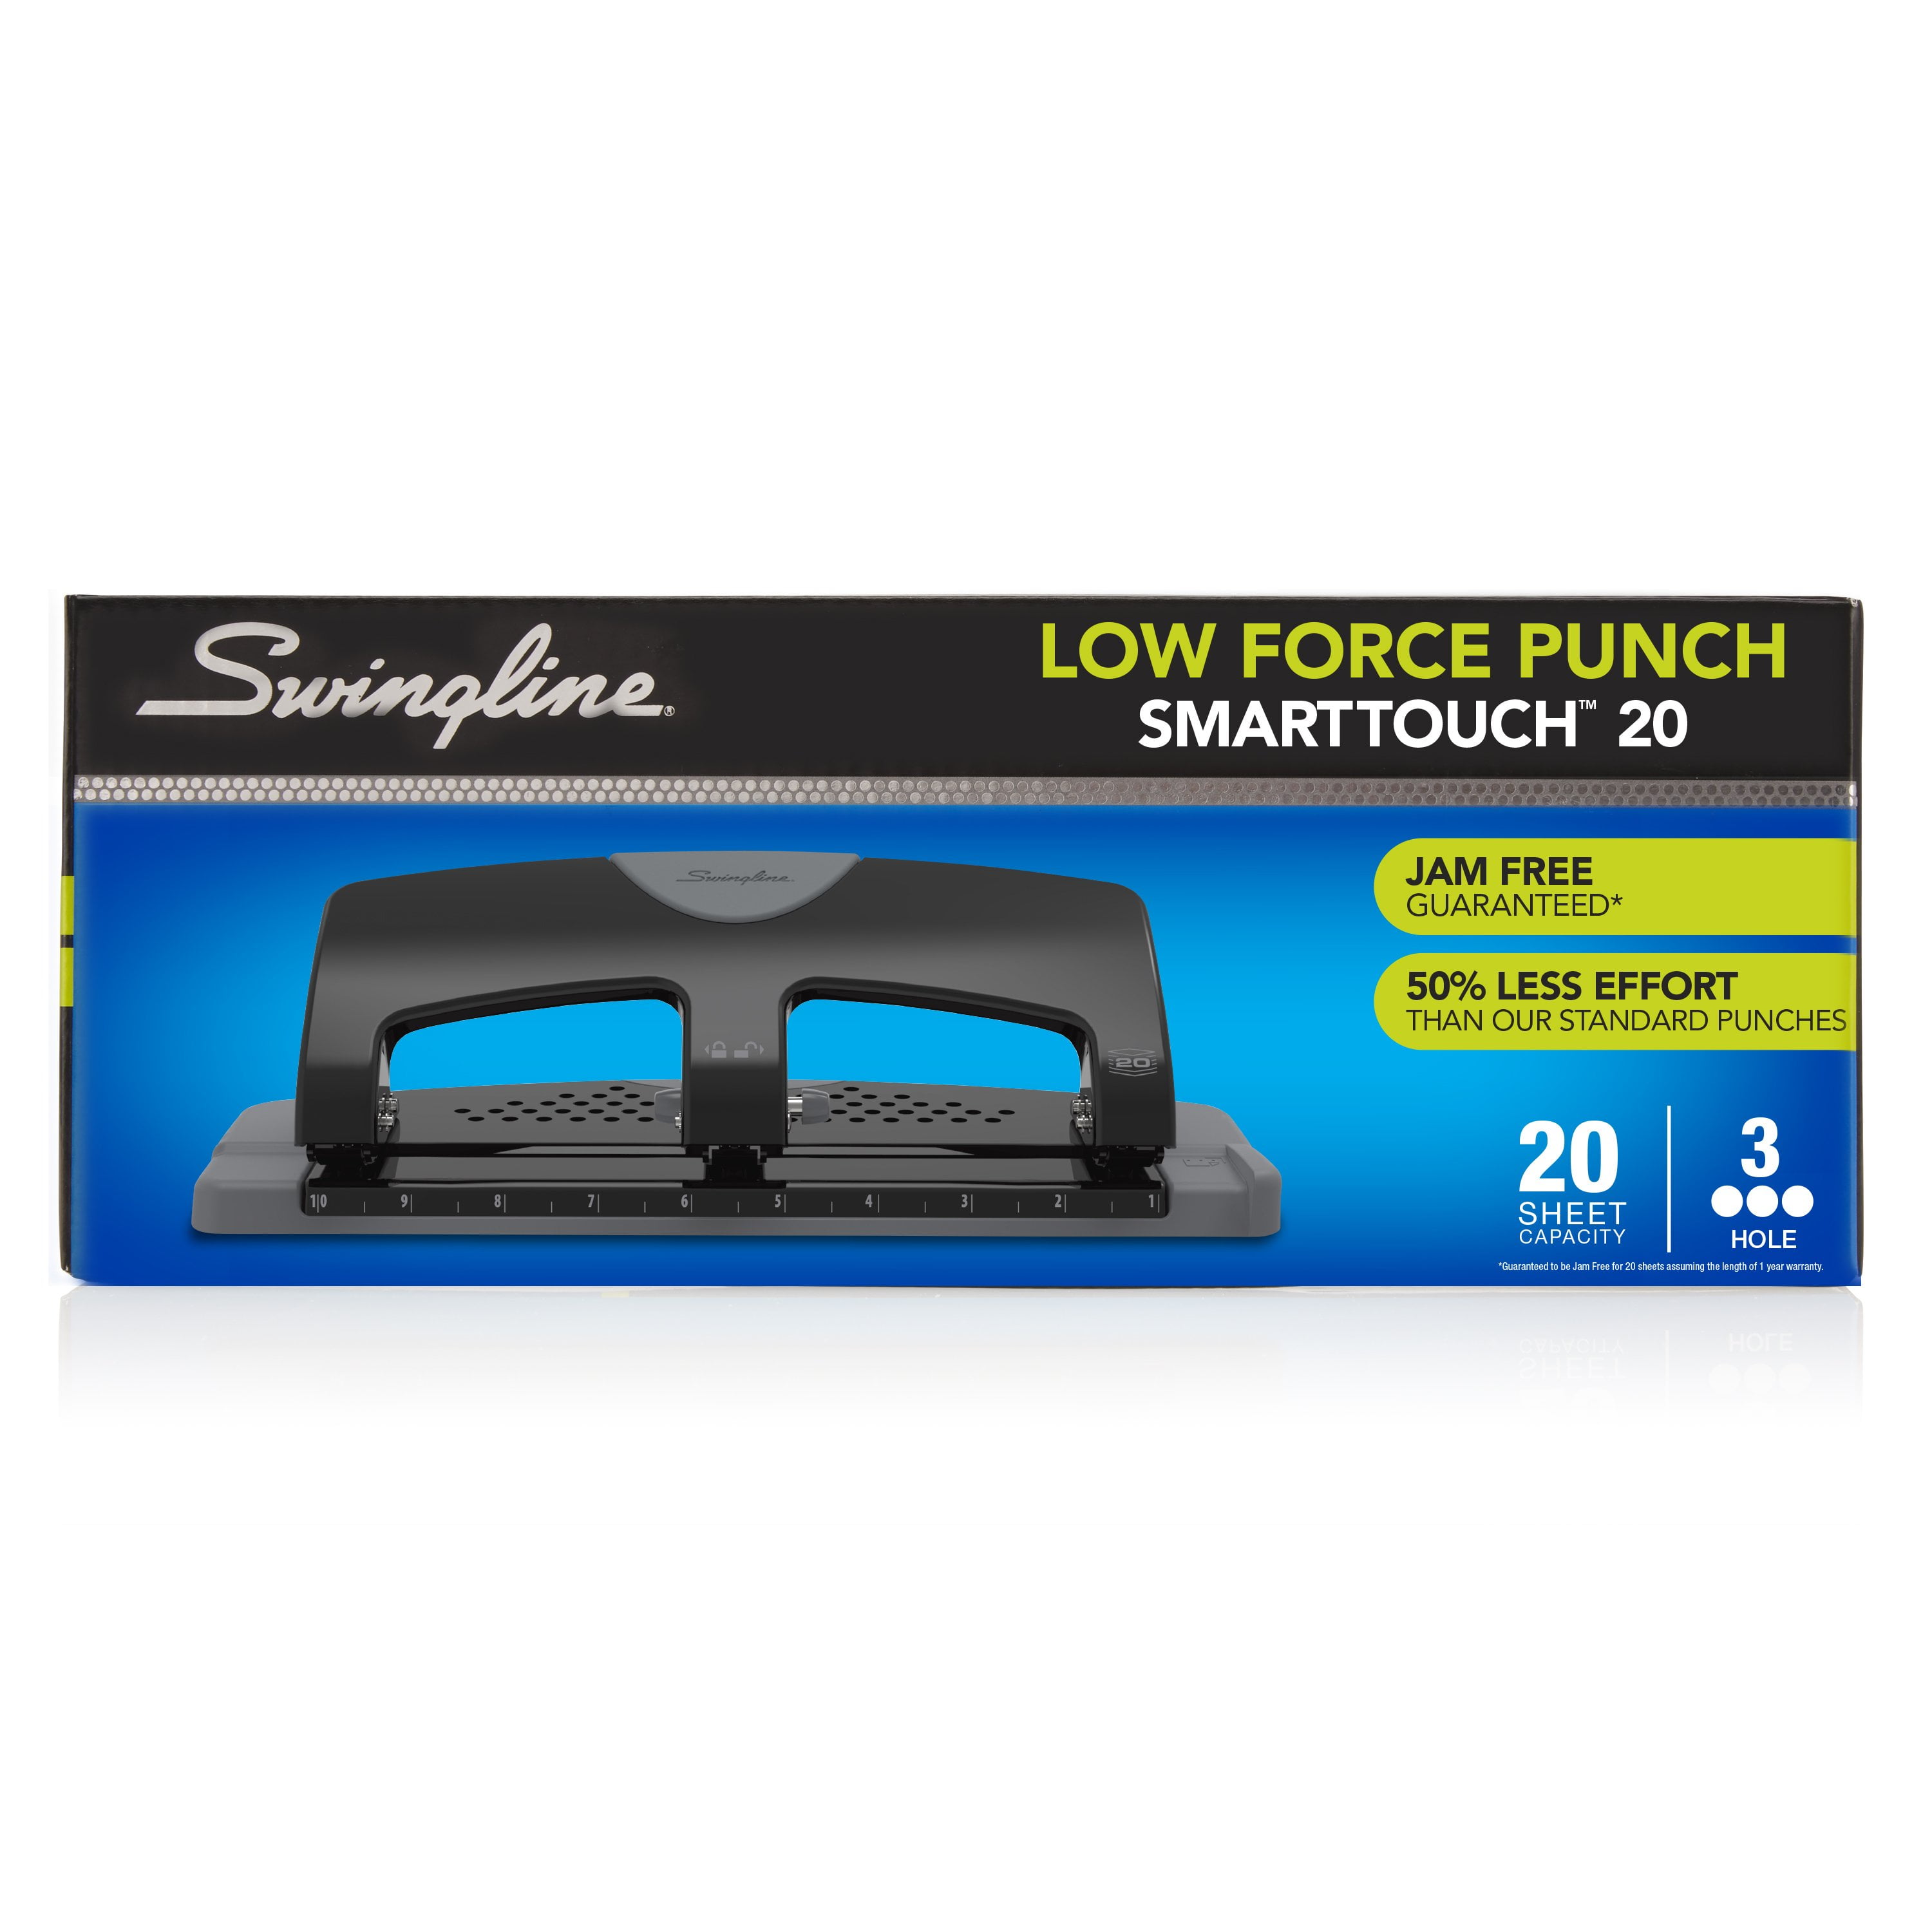 Swingline 32-Sheet Easy Touch Two-to-Three-Hole Punch - SWI74300 